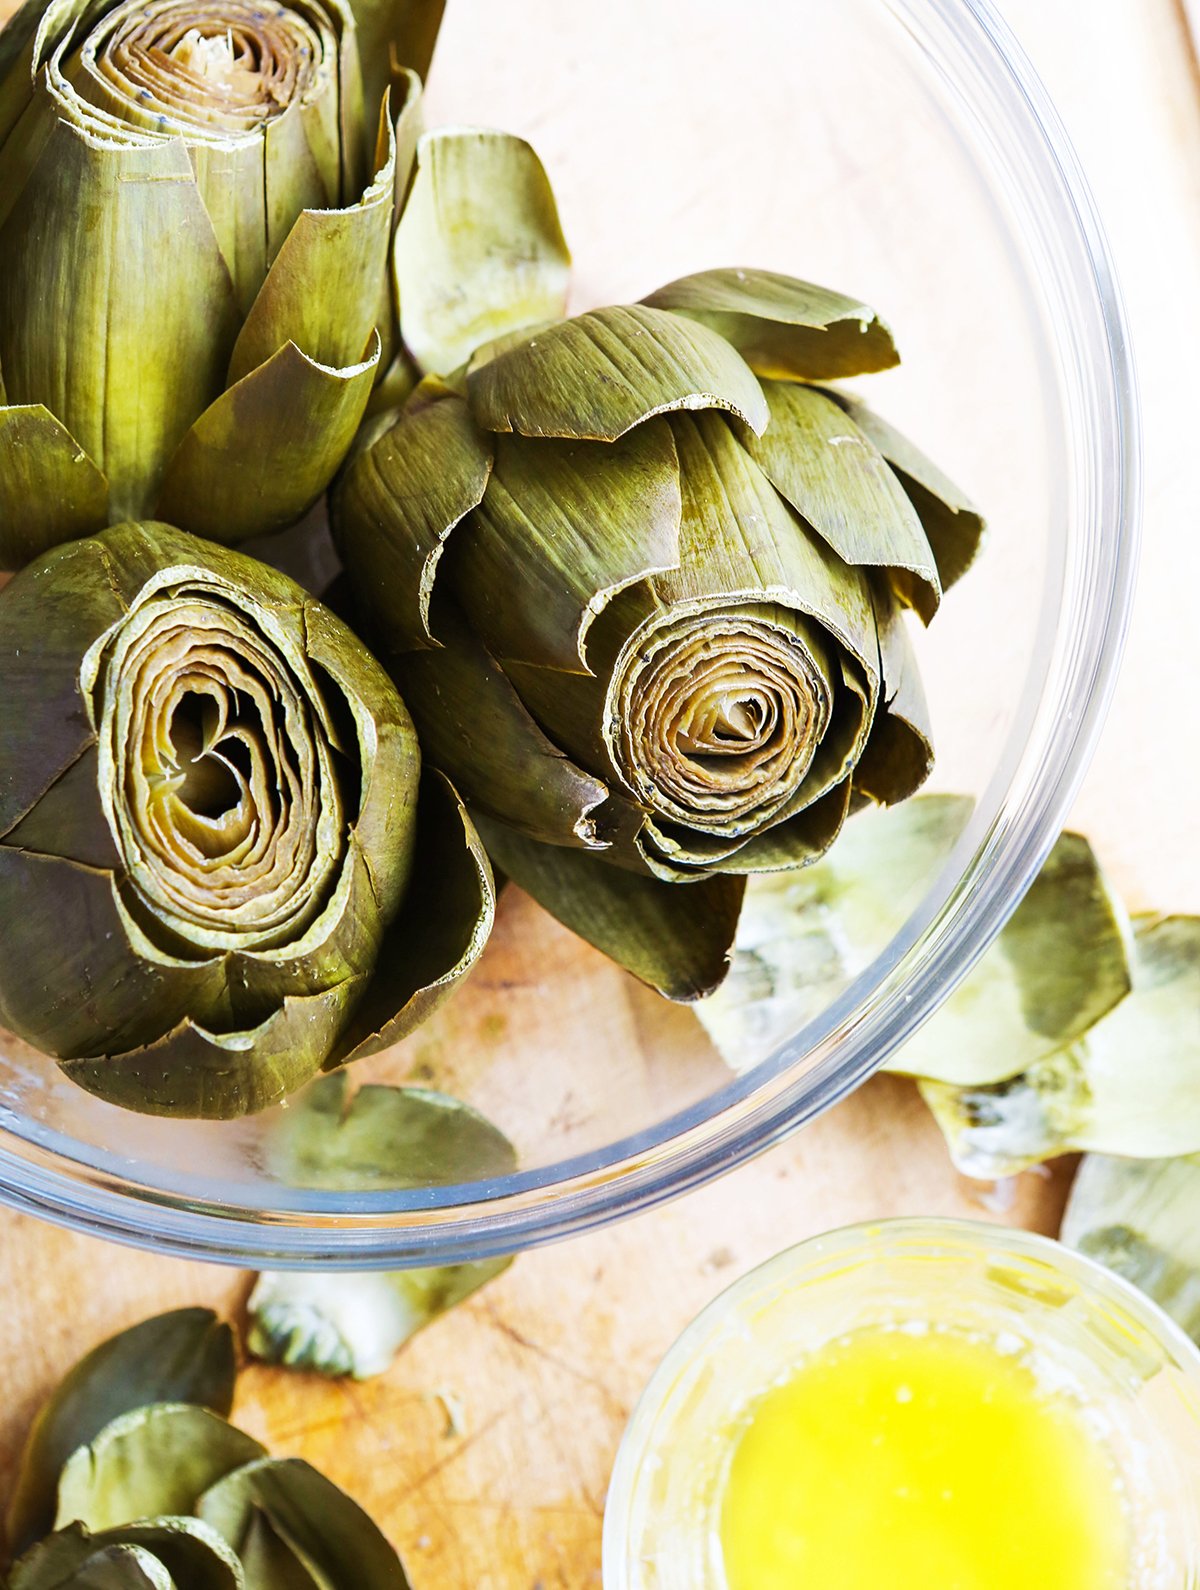 Bowl of cooked artichokes with butter dipping sauce nearby.